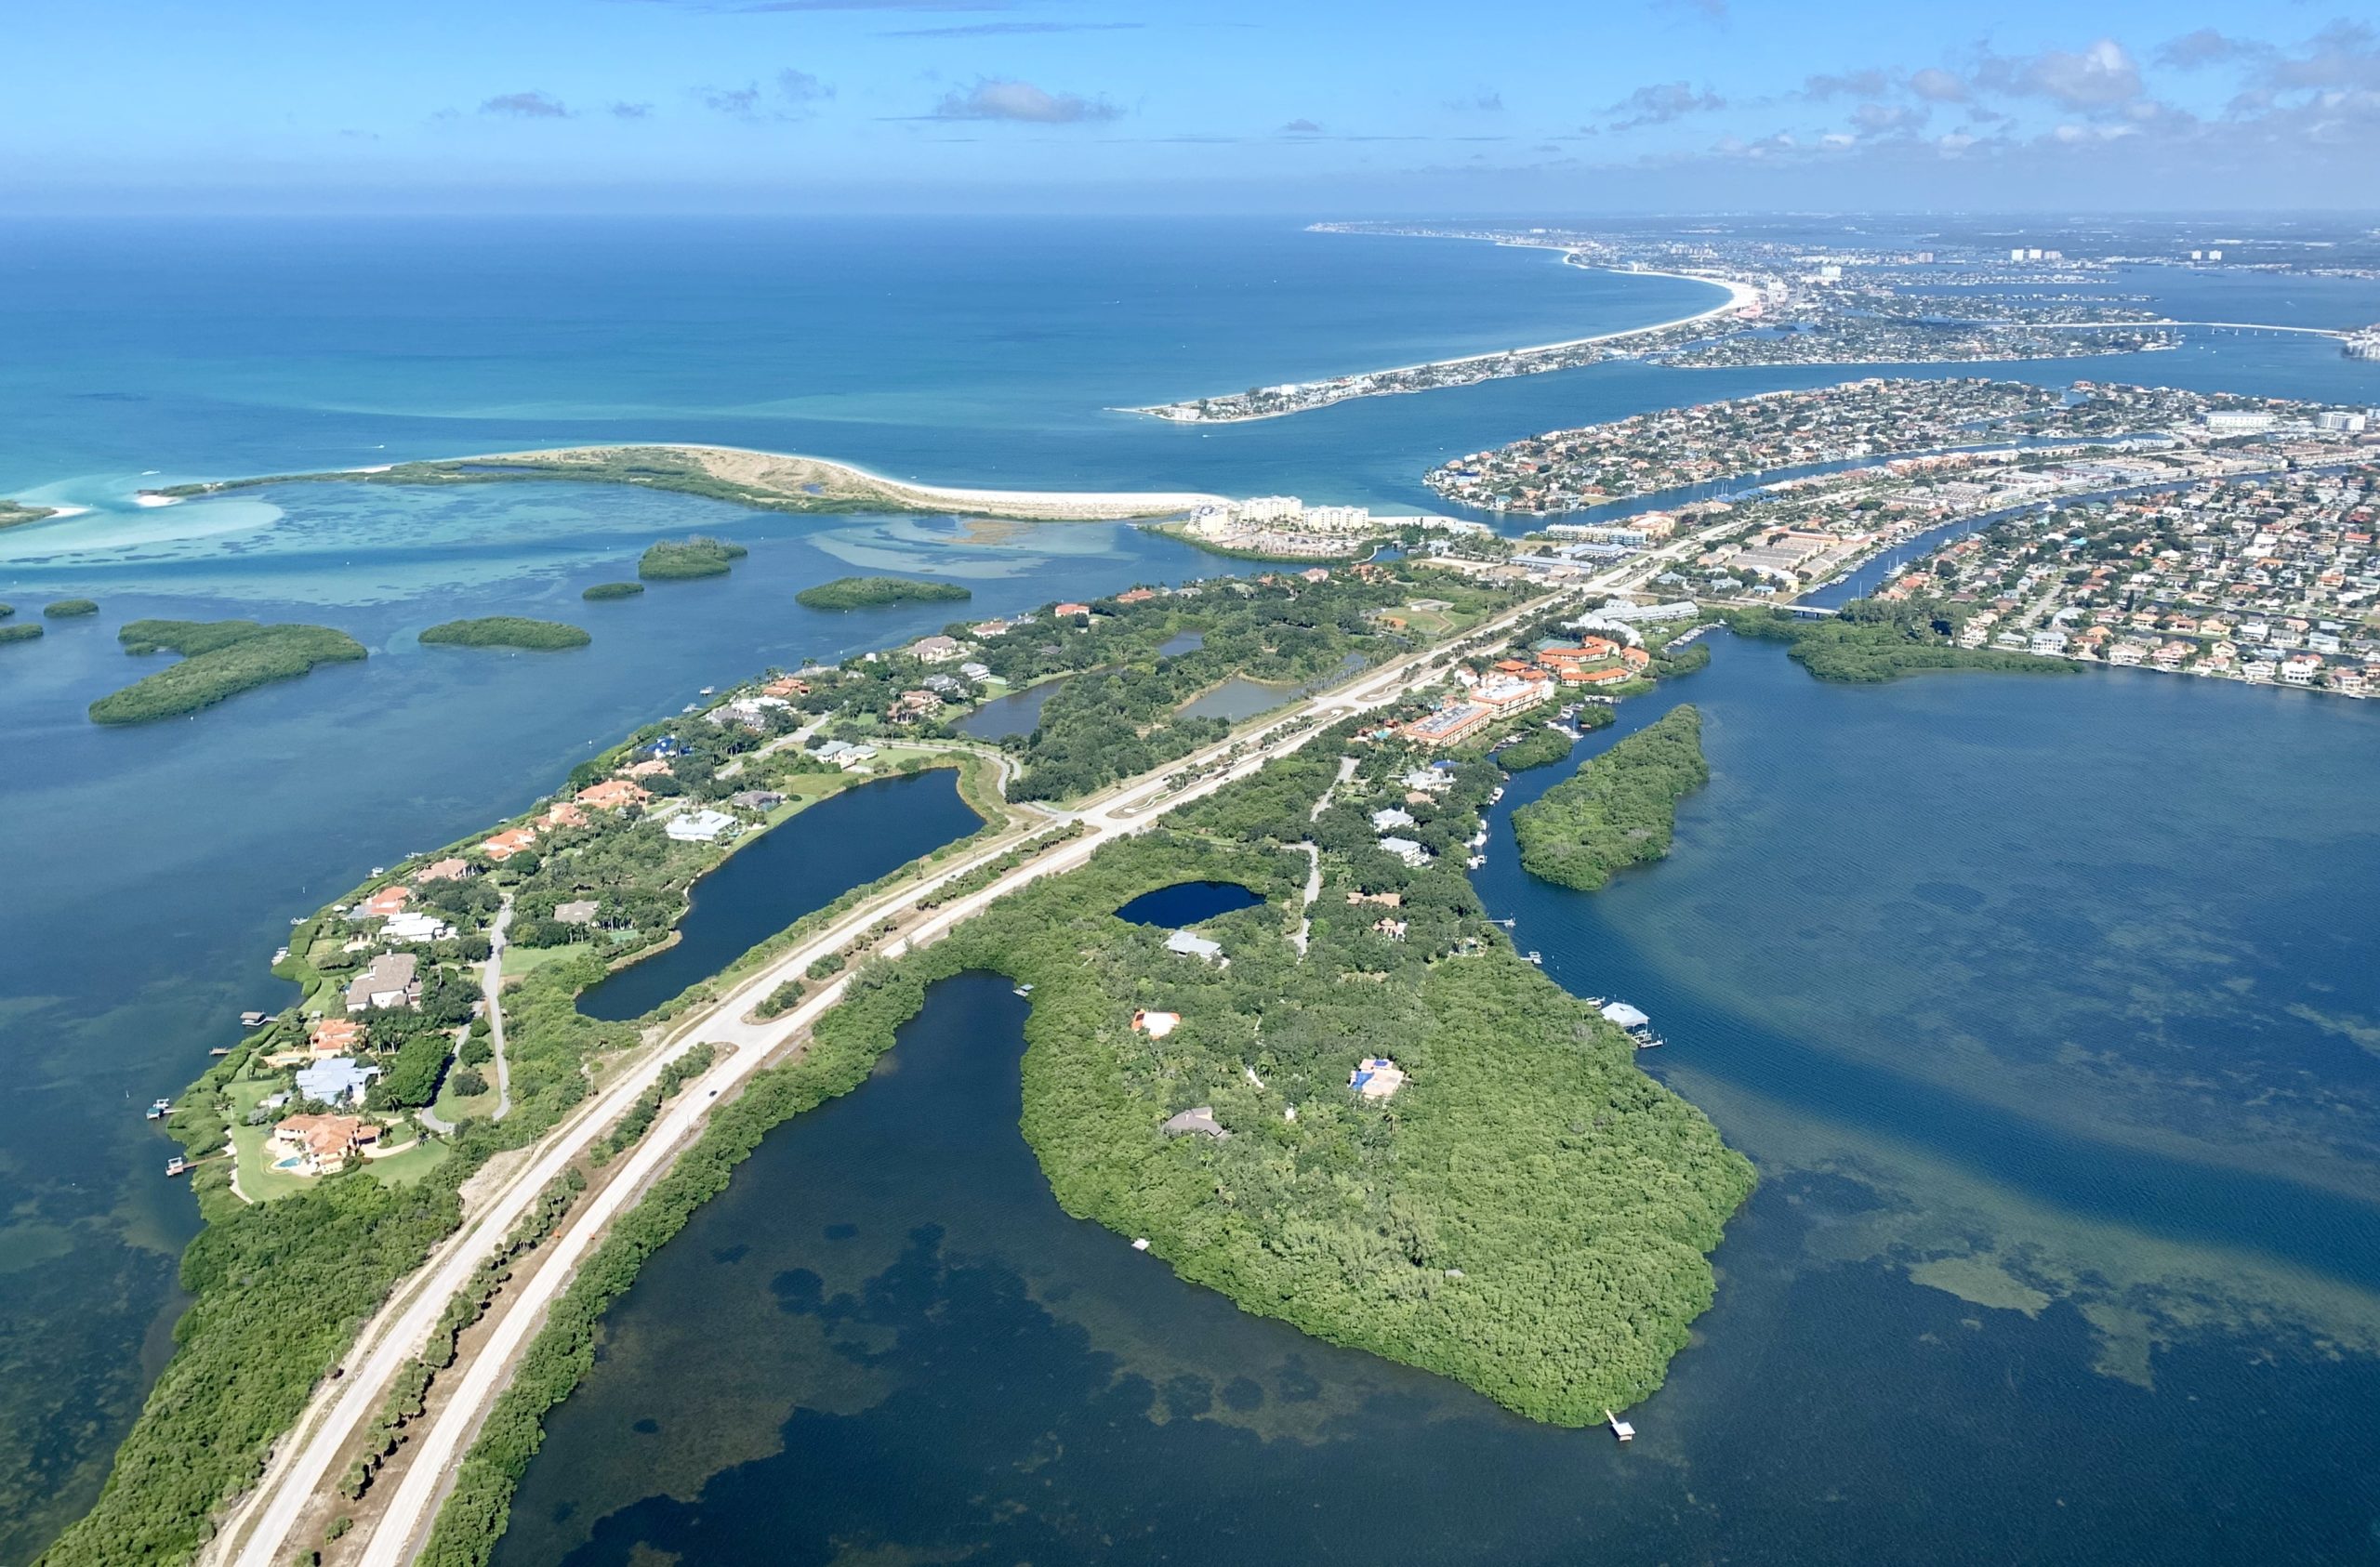 An aerial view of homes close to the water in Pinellas County, Florida.